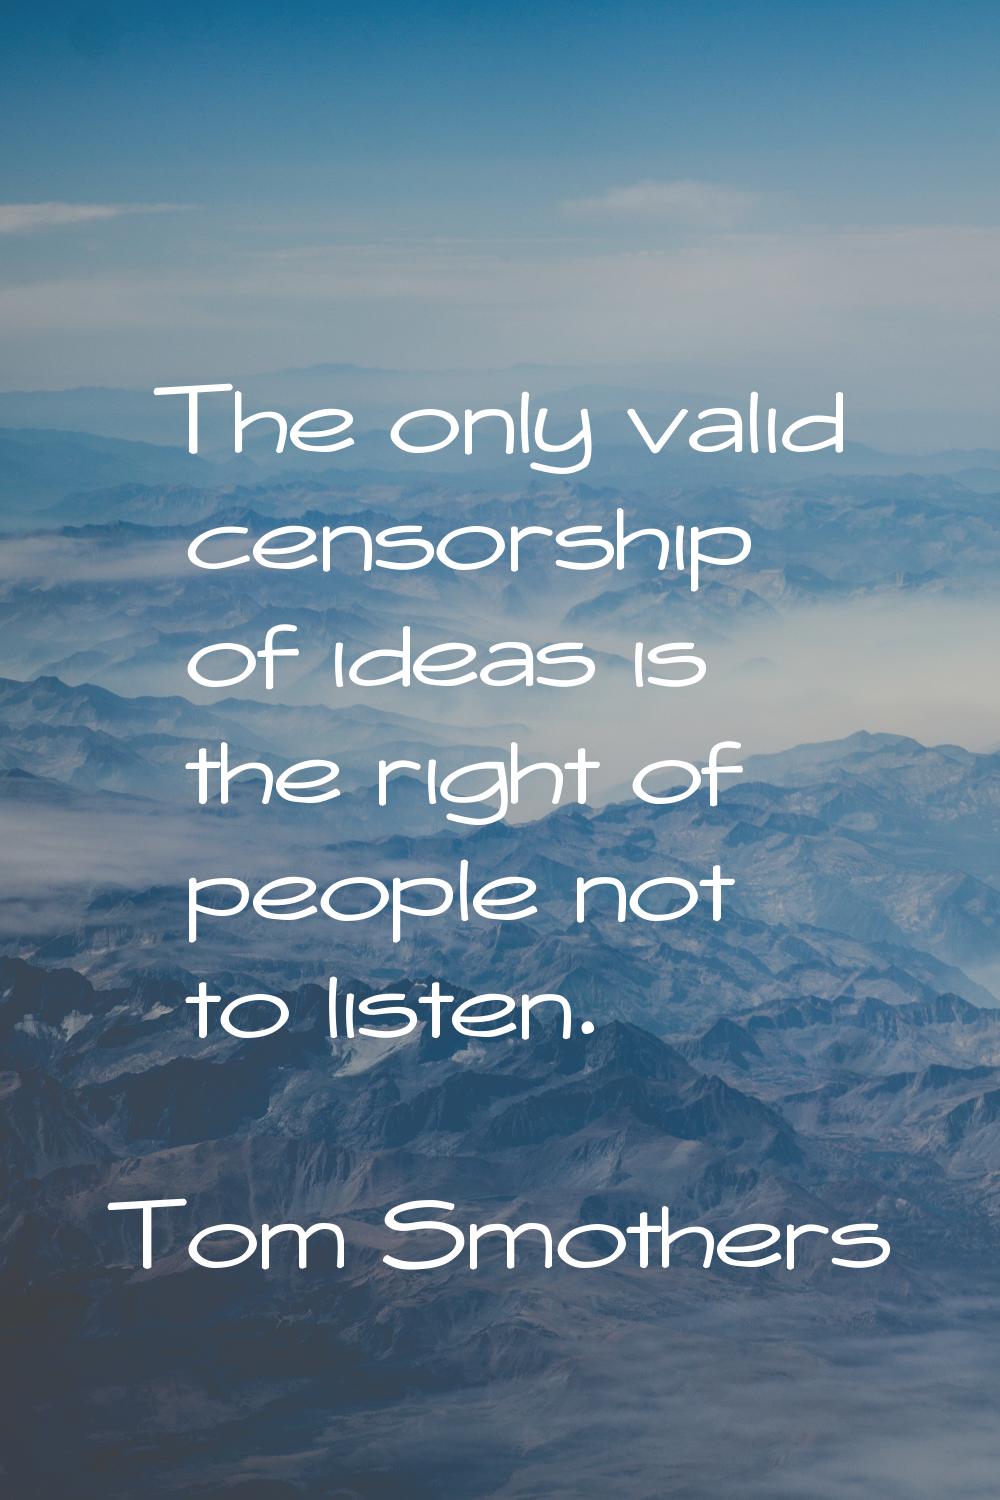 The only valid censorship of ideas is the right of people not to listen.